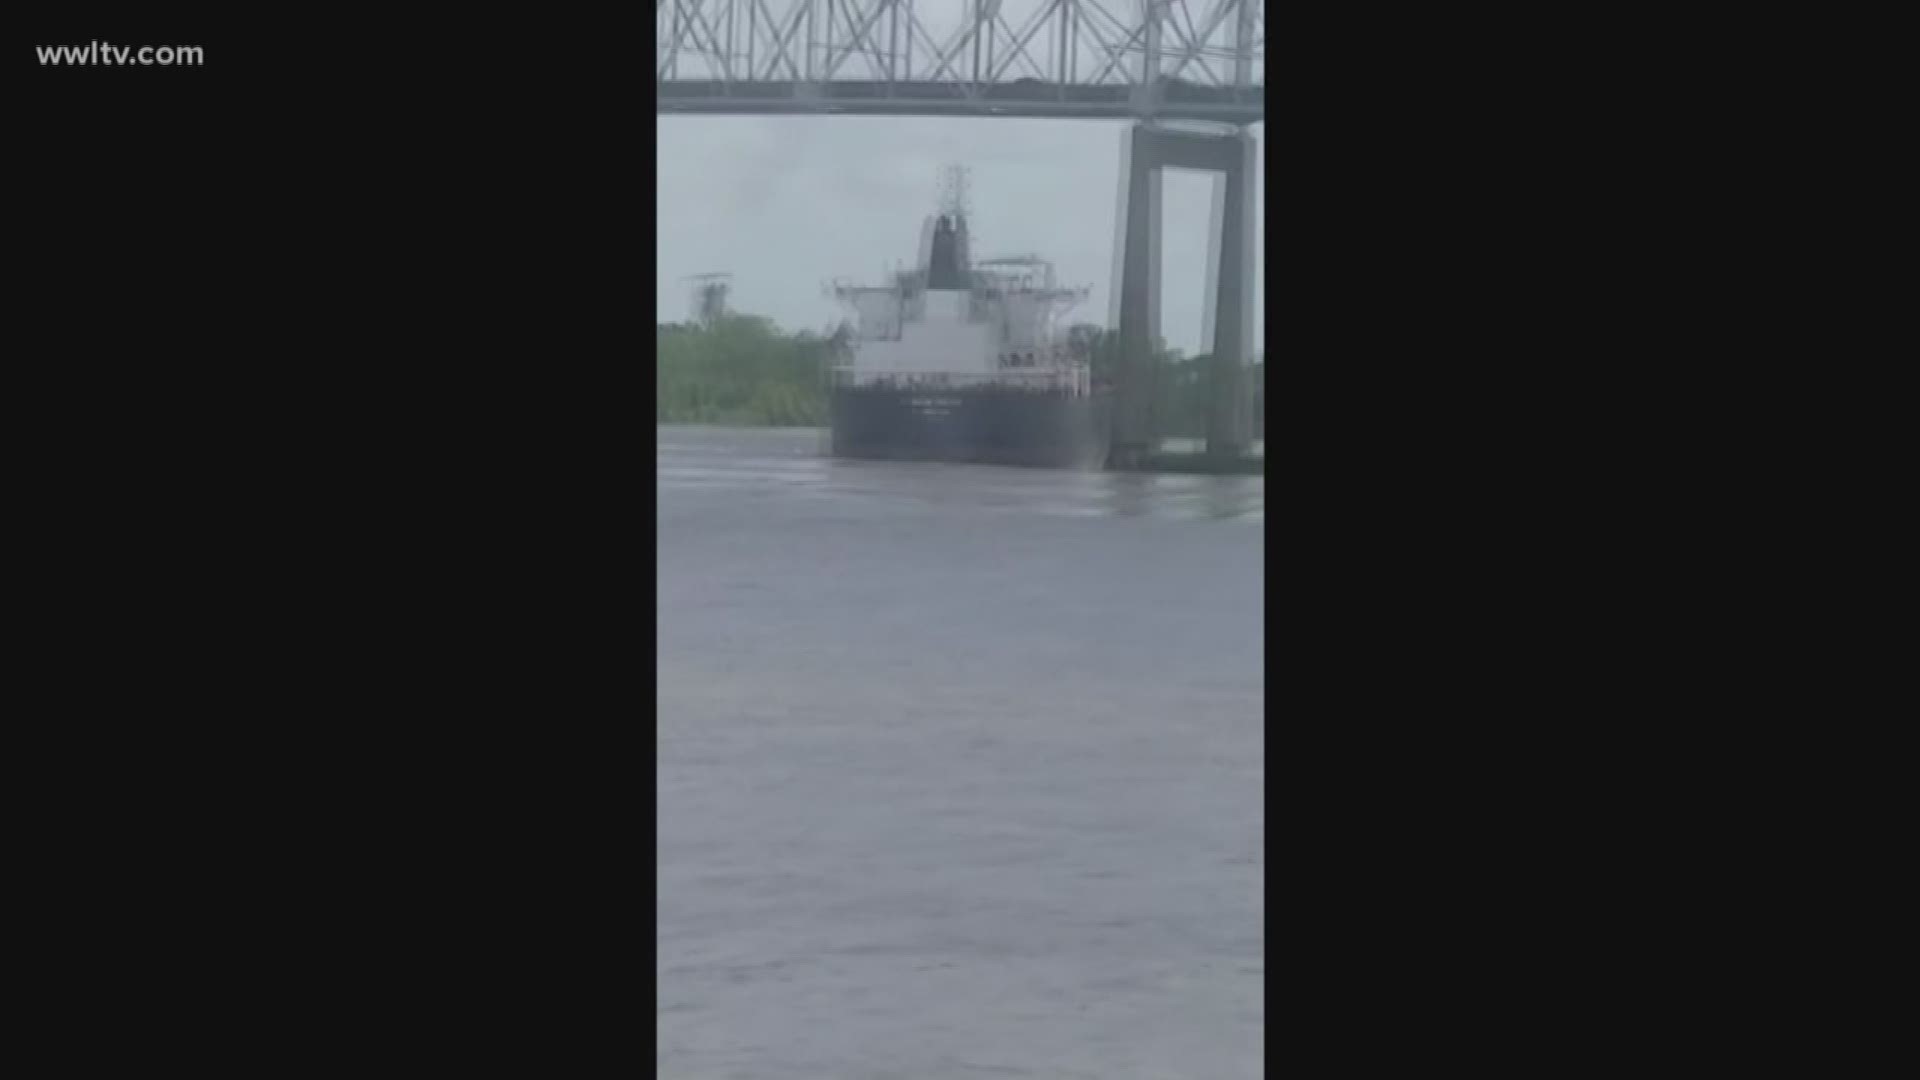 A ship being pulled by a tugboat hit the bridge Sunday afternoon, temporarily closing the roadway in both directions.